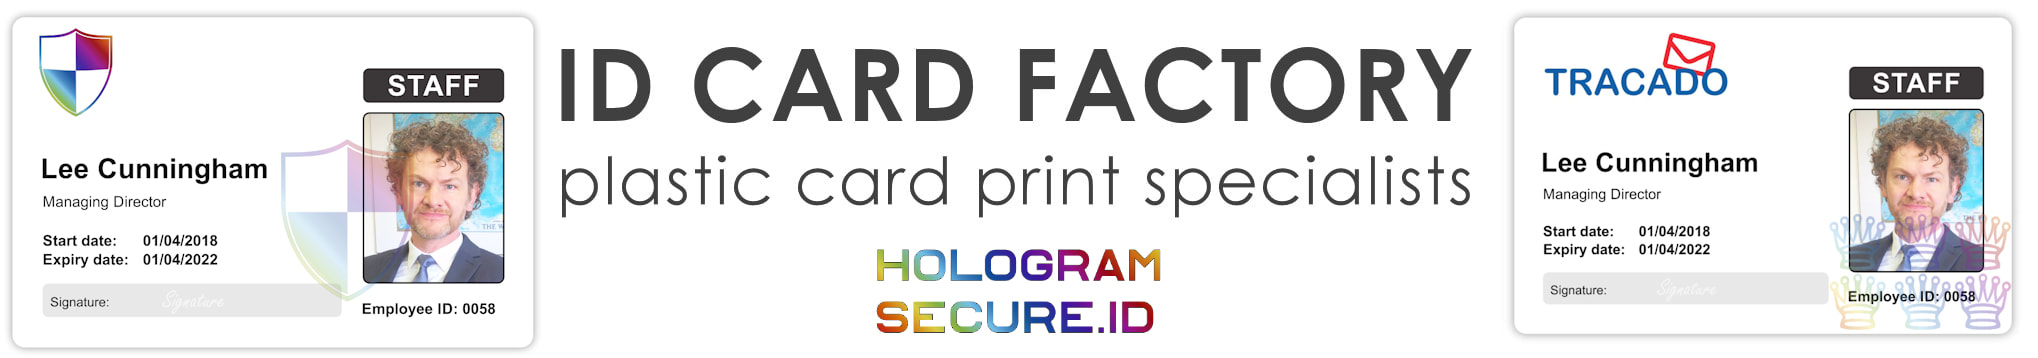 Bristol holographic ID cards | examples of staff photo ID cards | samples of employee Identity card printing | Workers ID cards printed with hologram